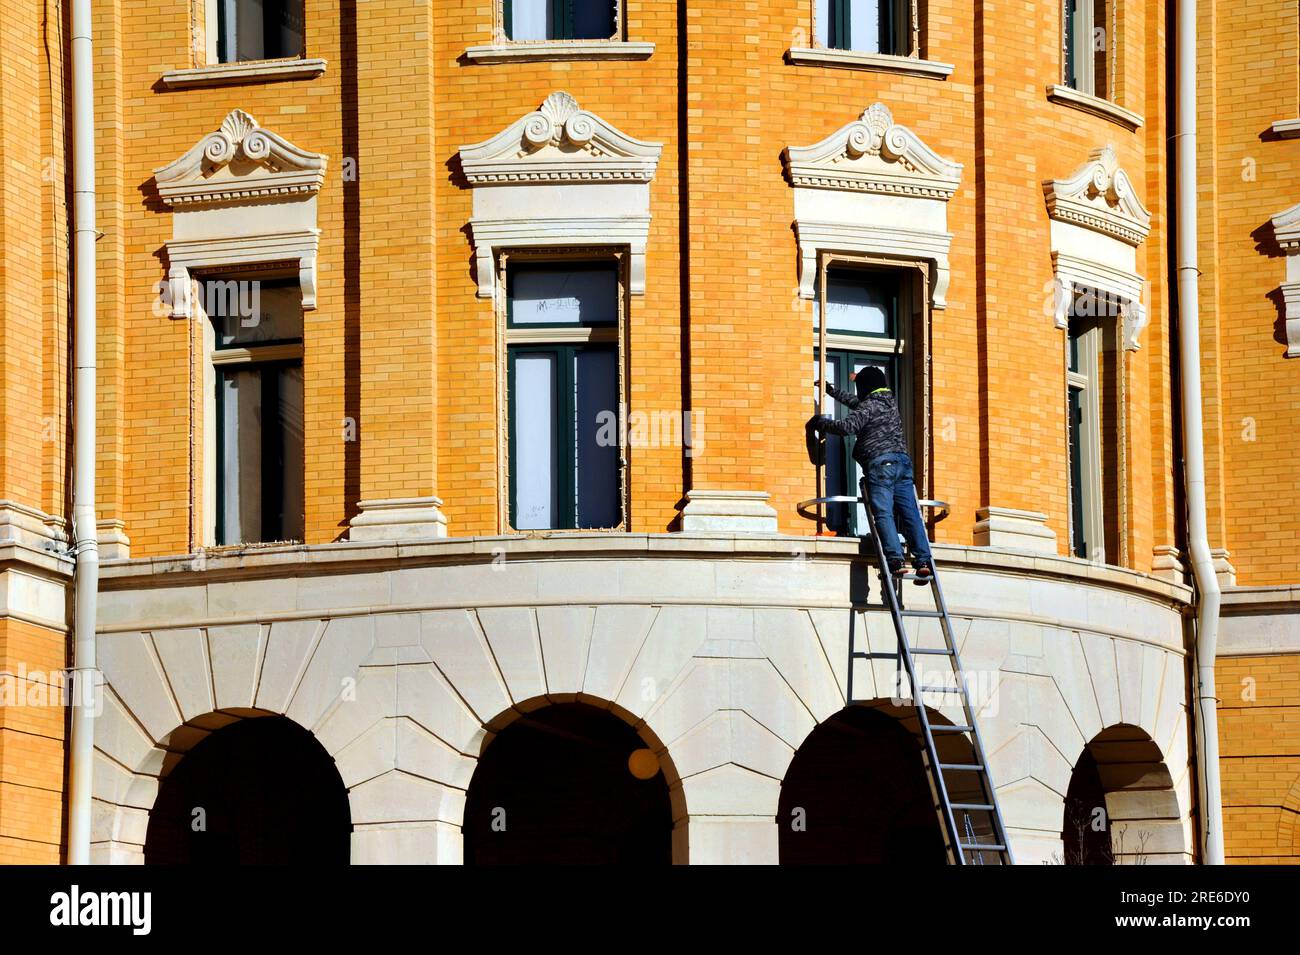 Harrison County Courthouse in Marshall, Texas gets a facelift as it completes decorations for Christmas.  Worker is repainting window trim and lights Stock Photo